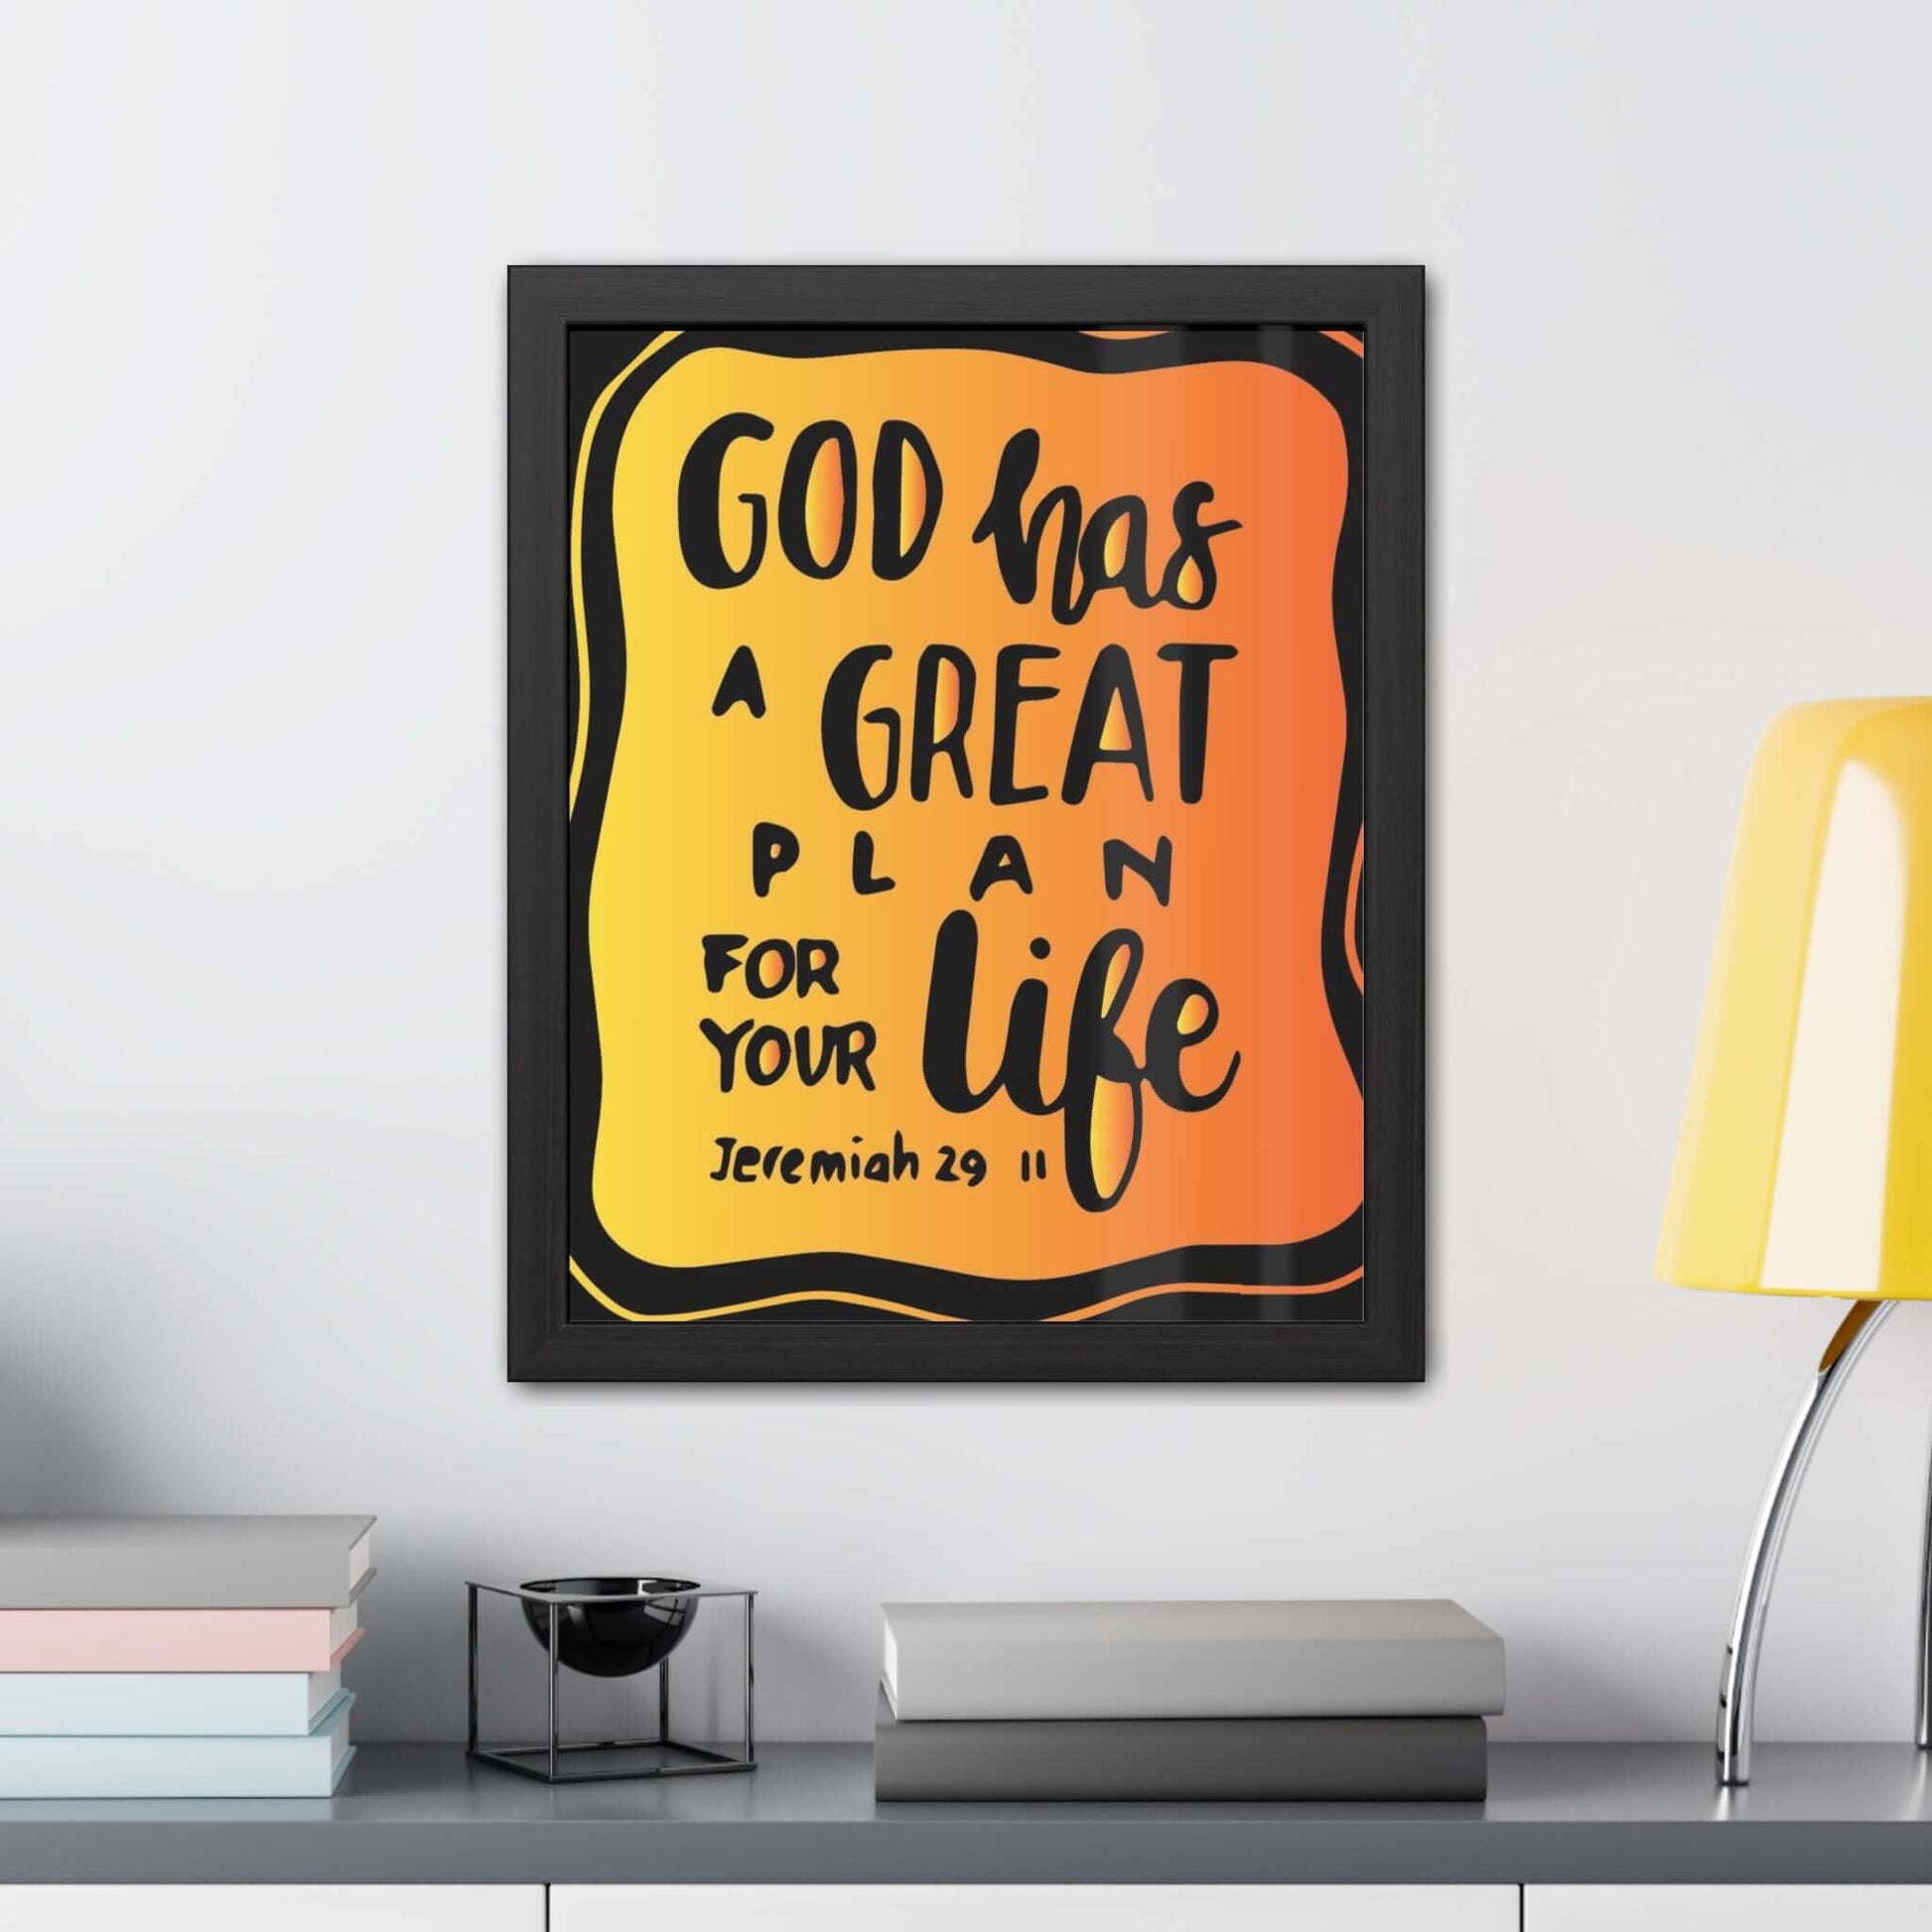 Modern Poster with Hand-Crafted Wooden Frame - Featuring Jeremiah 29:11 | Art & Wall Decor,Framed,Hanging Hardware,Home & Living,Poster,Posters